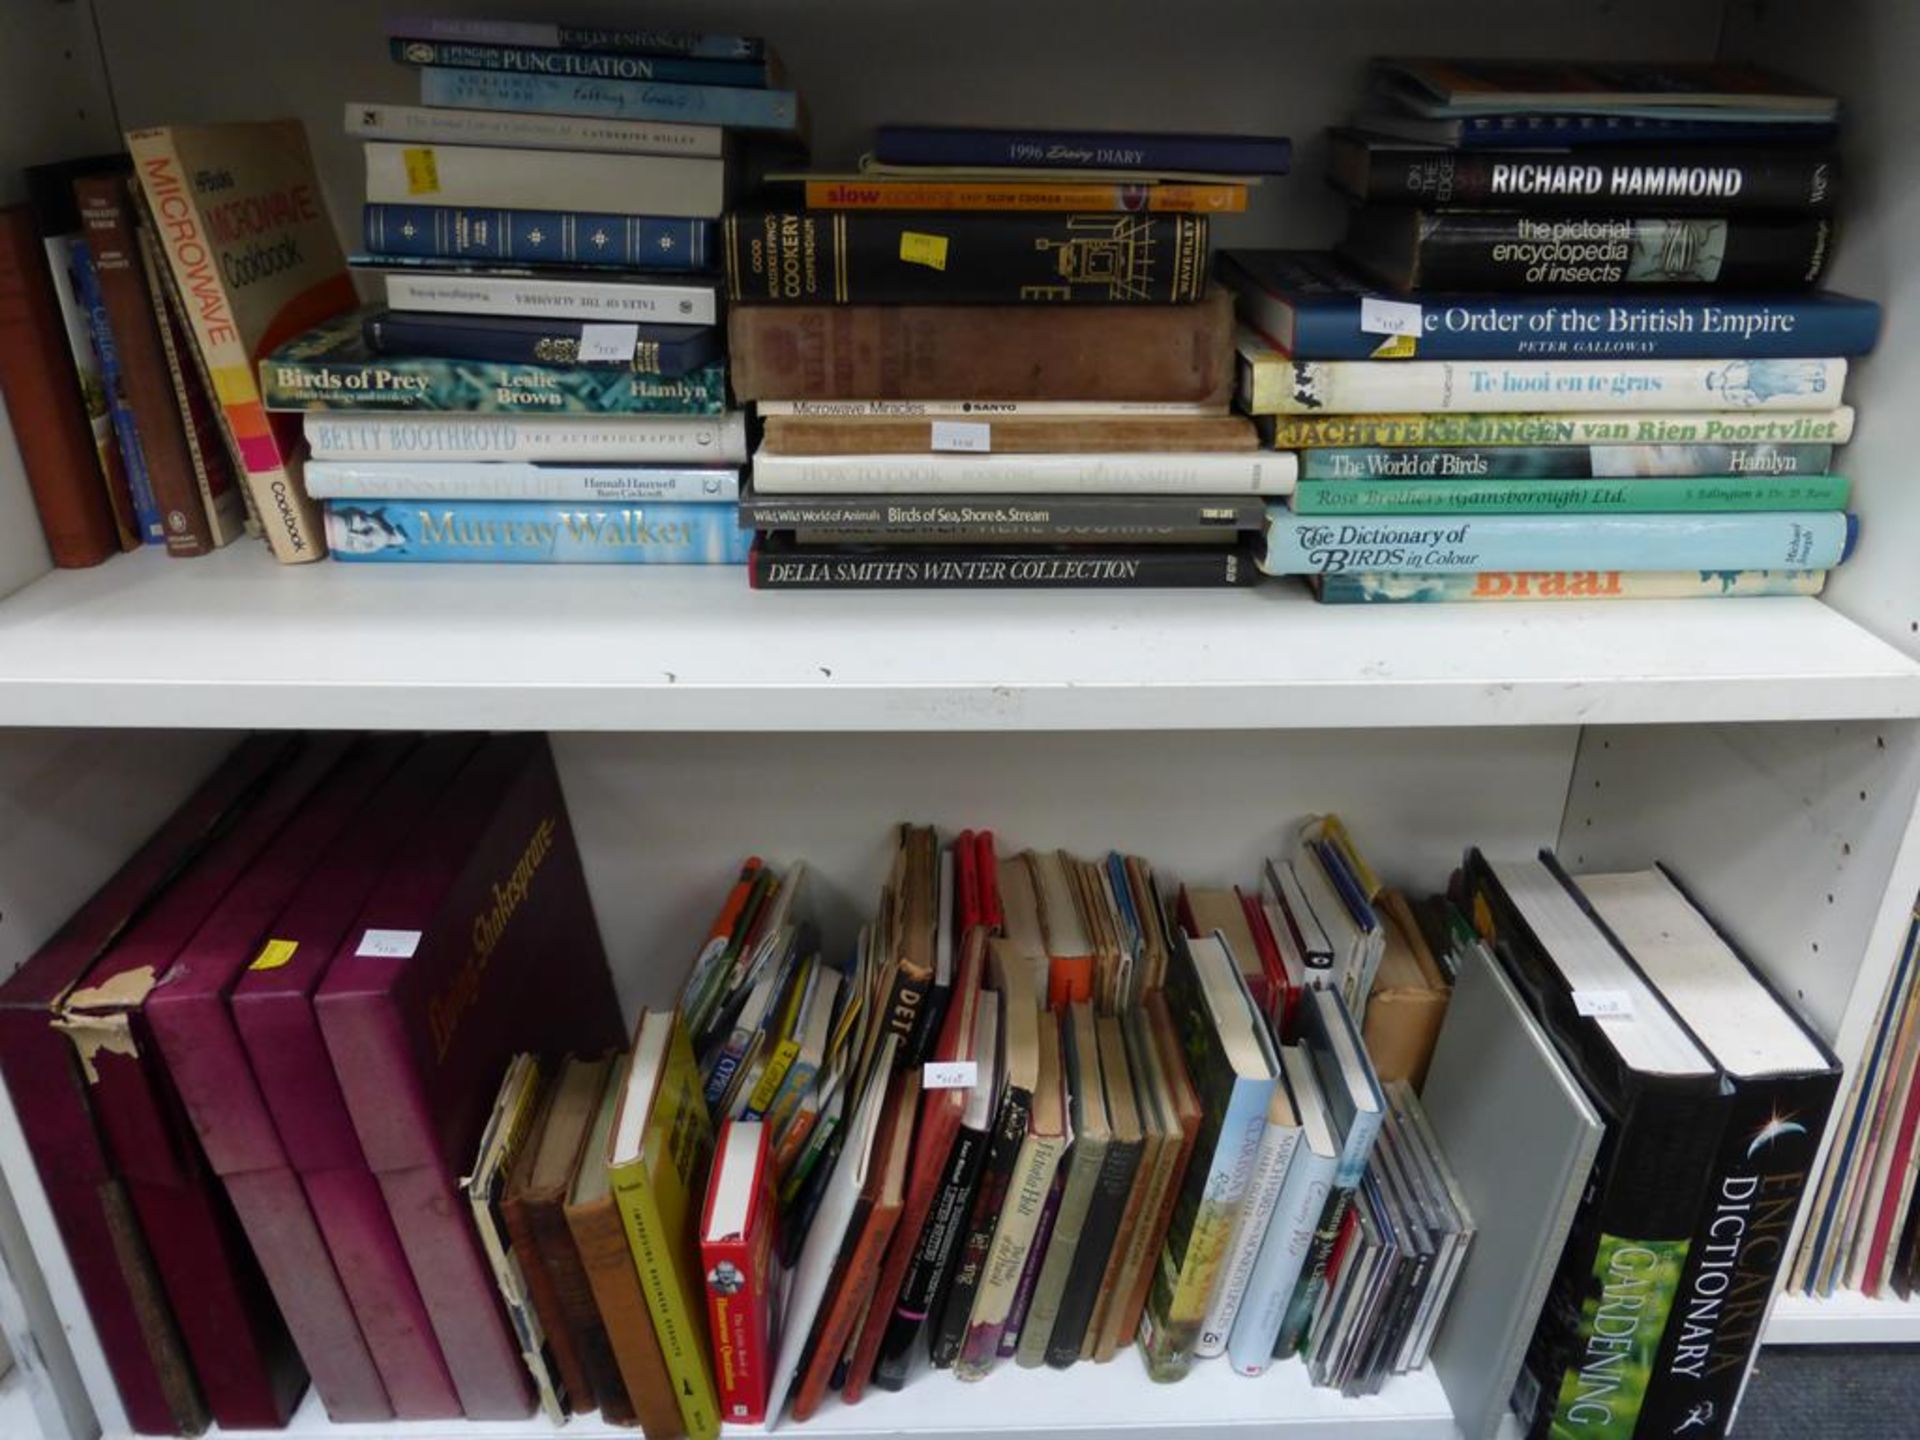 Two shelves to contain a selection of Books, subjects including Birds, Cooking, History etc. Also